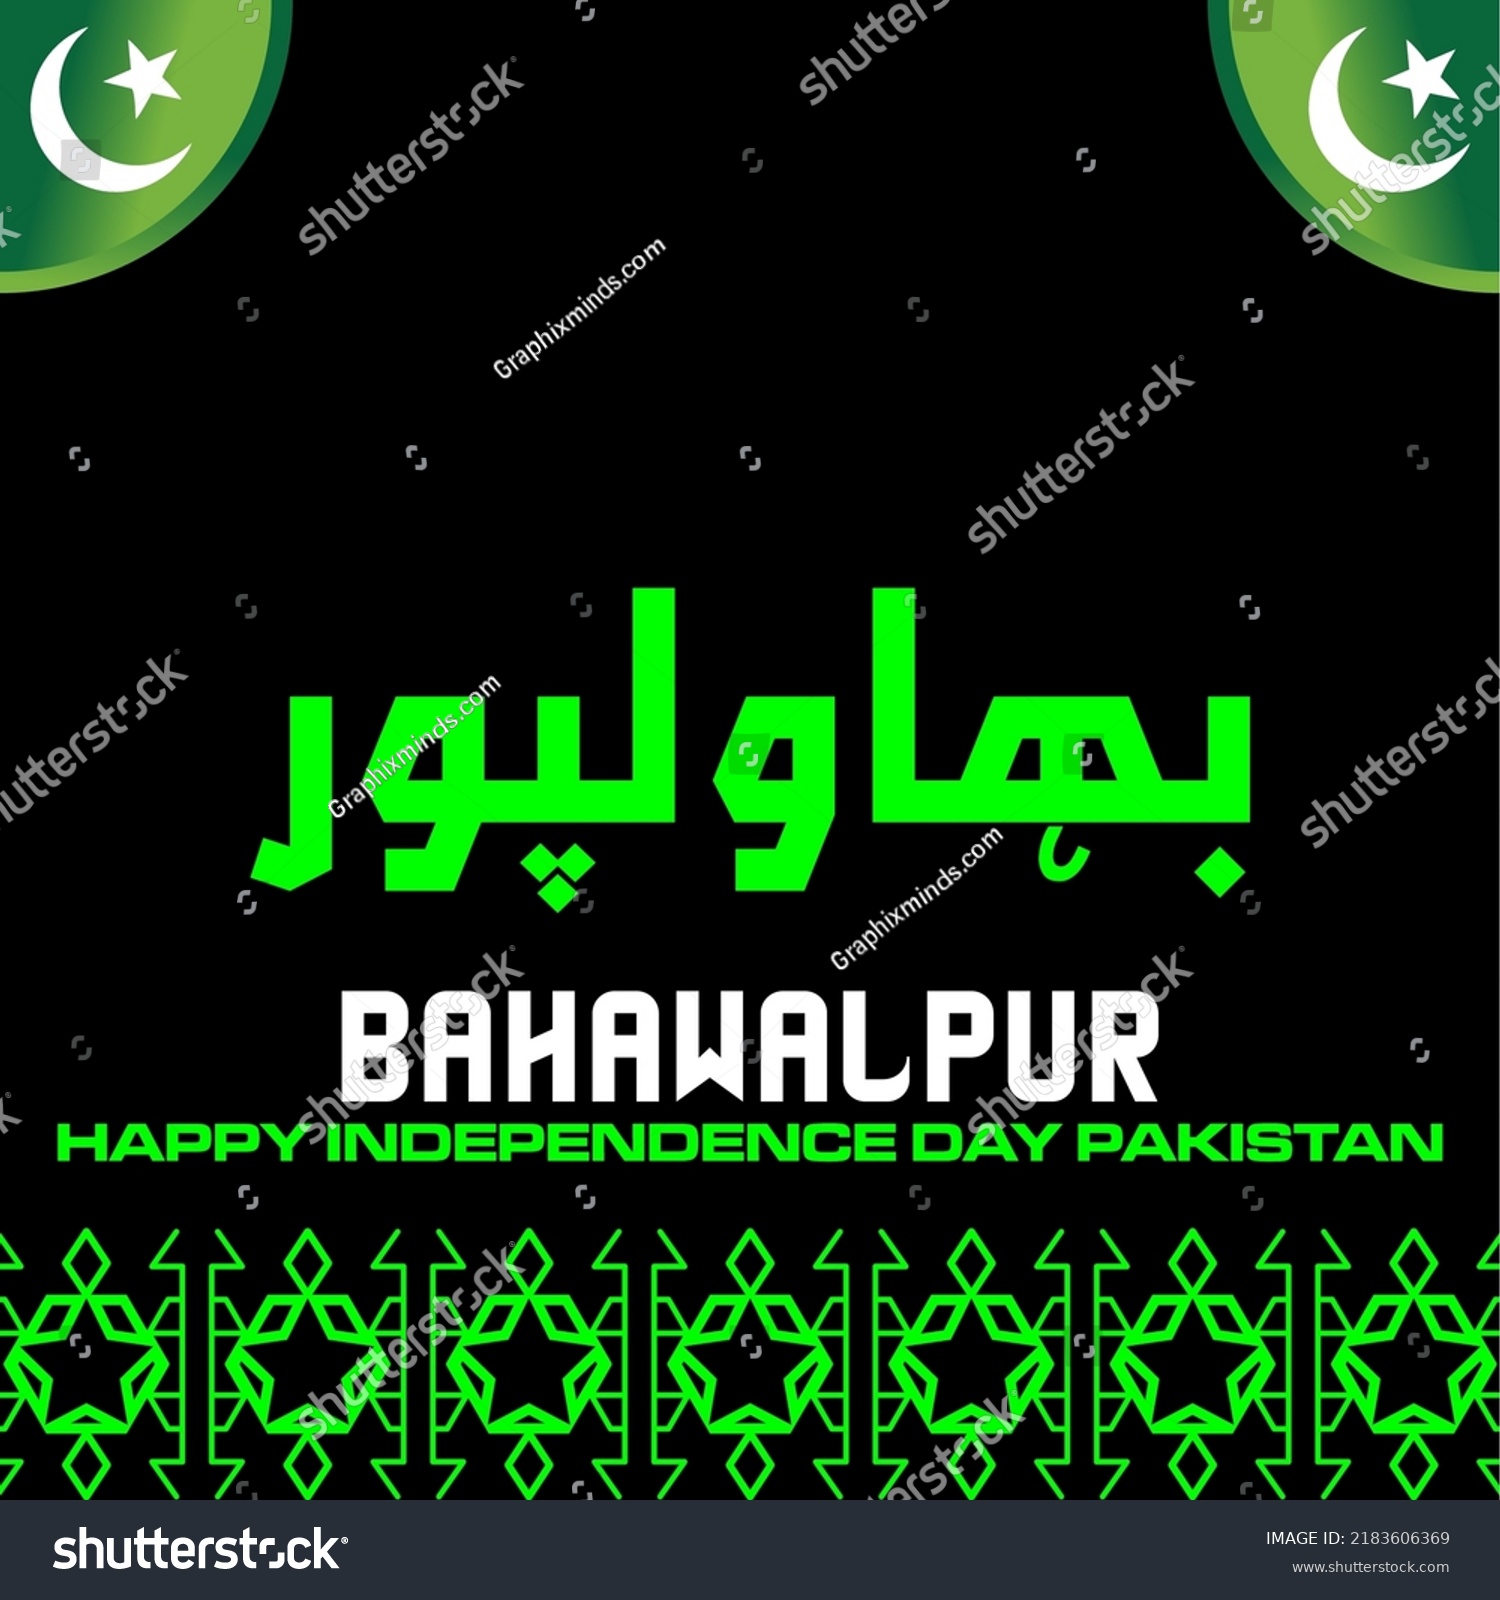 SVG of HAPPY INDEPENDENCE DAY PAKISTAN District 